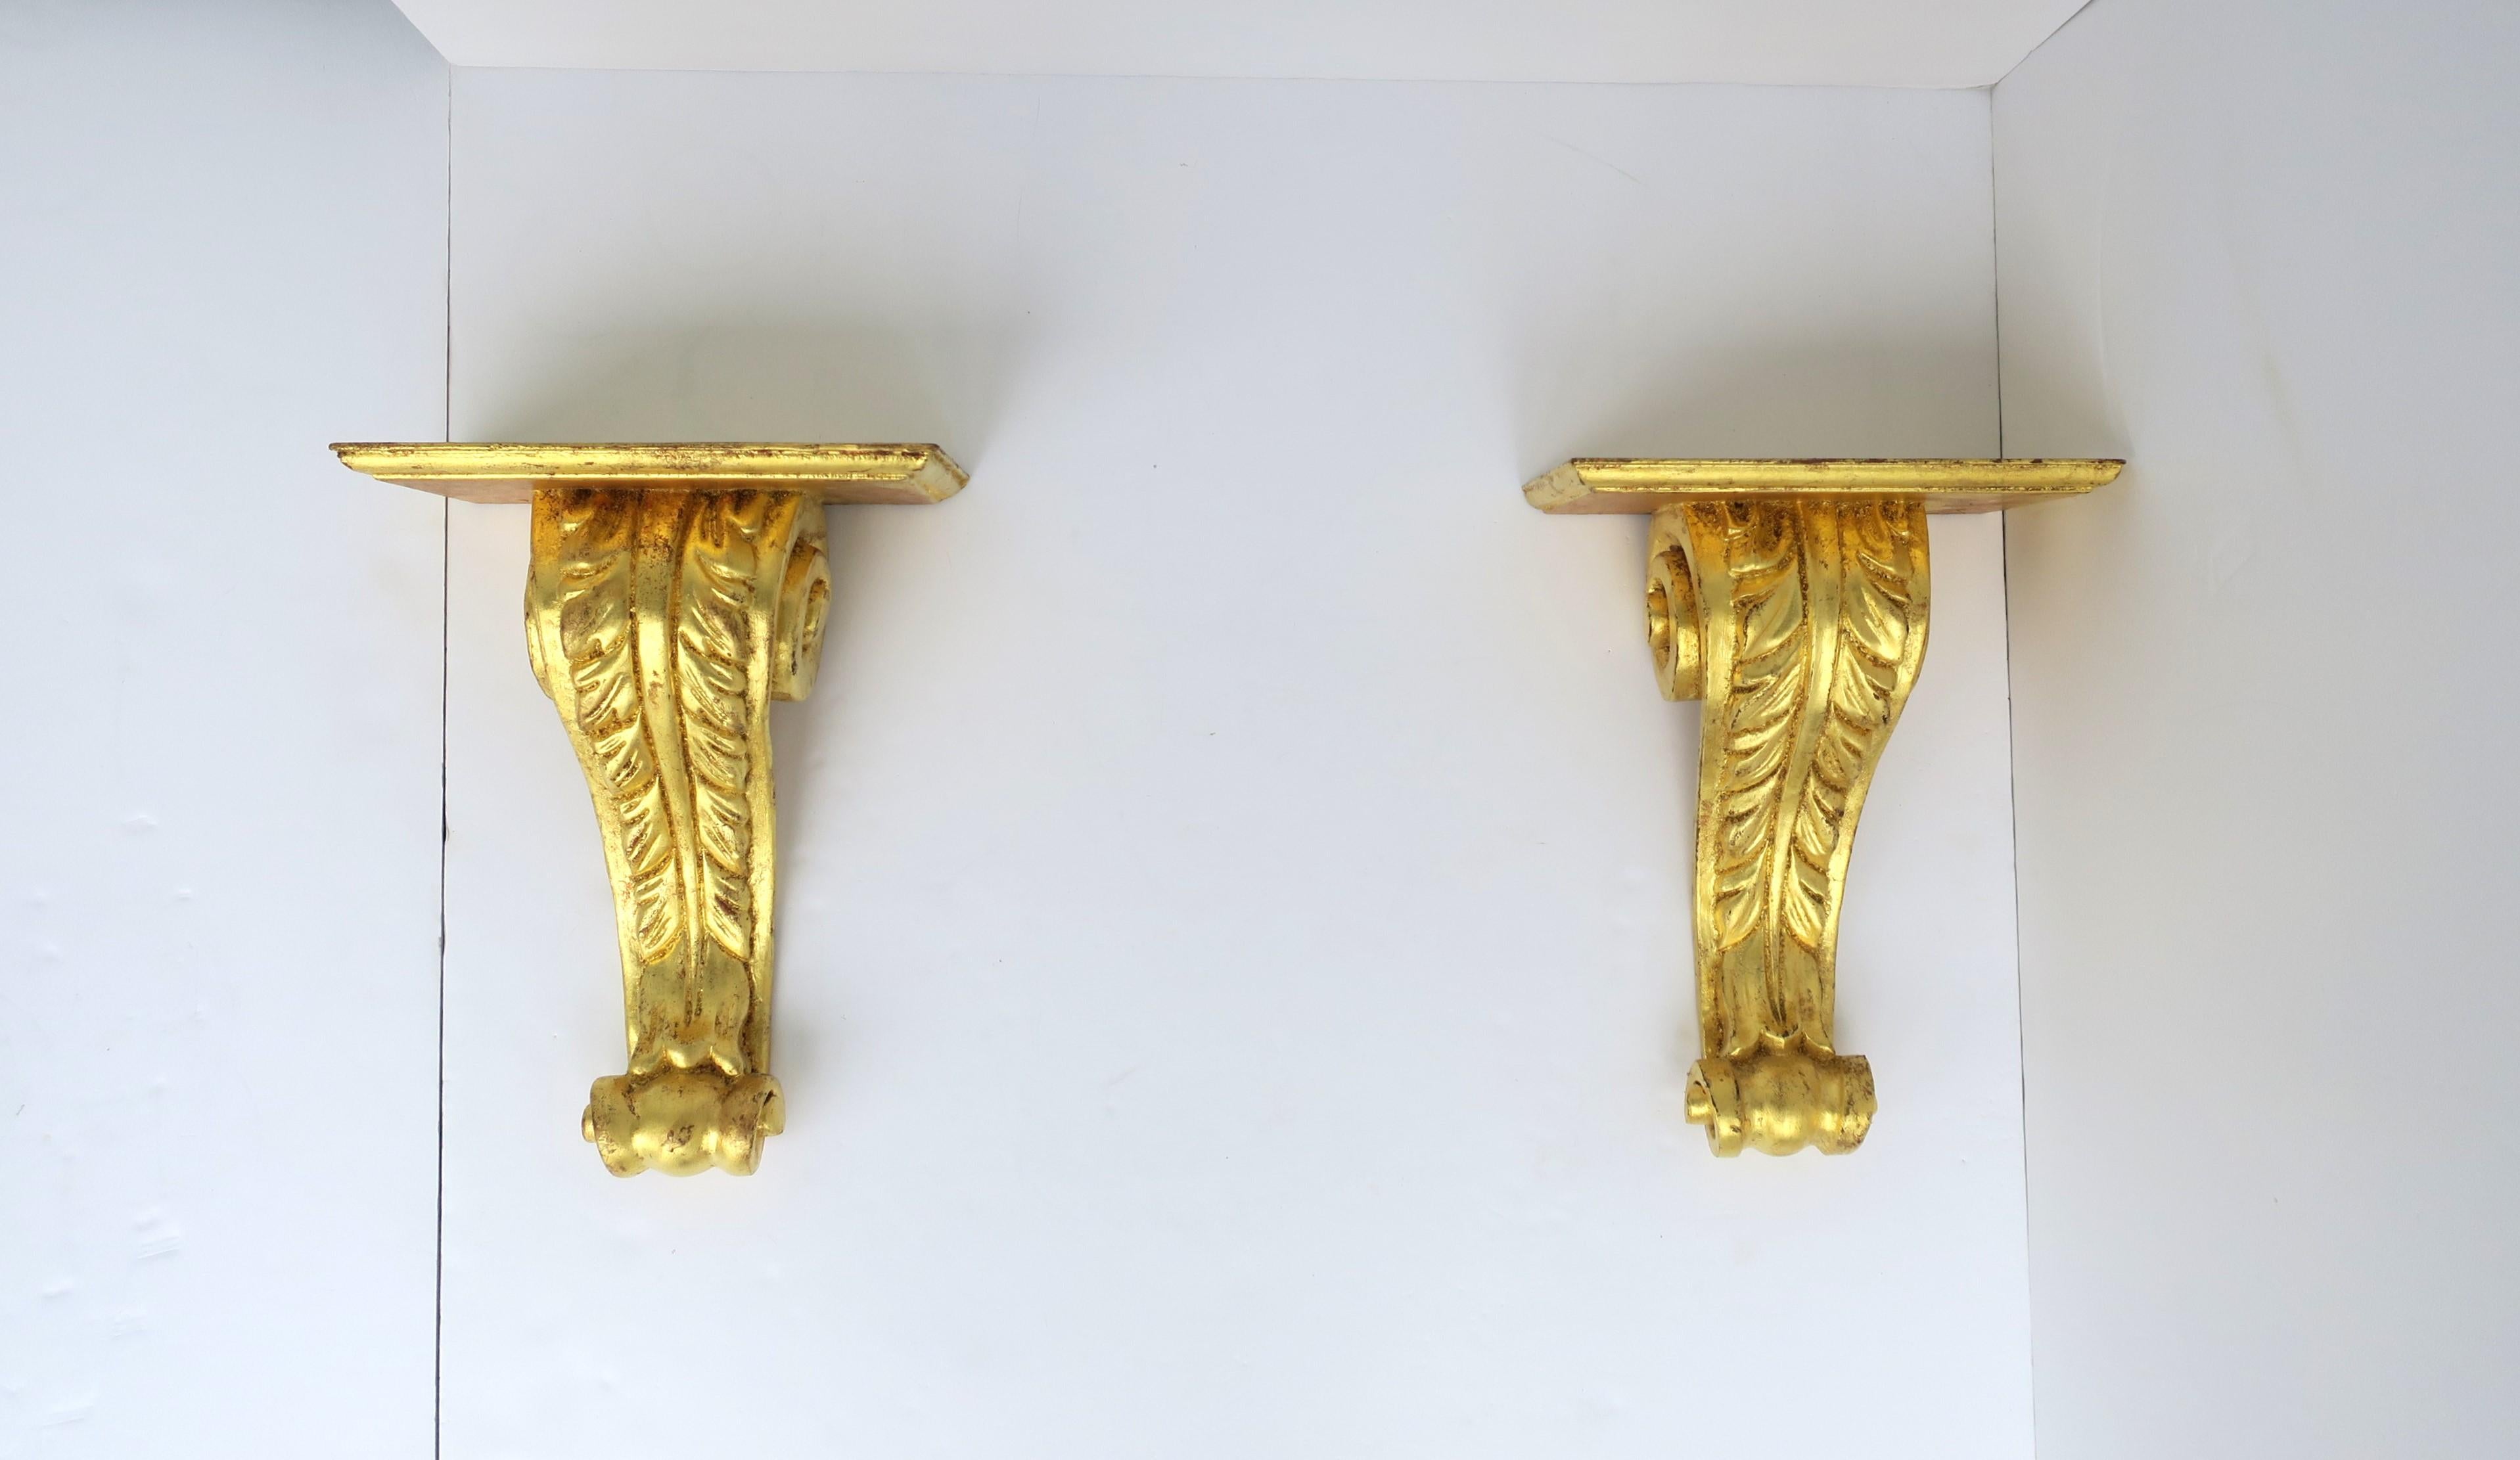 Hand-Painted Italian Gold Gilt Giltwood Wall Shelves Acanthus Leaf Design, Pair For Sale